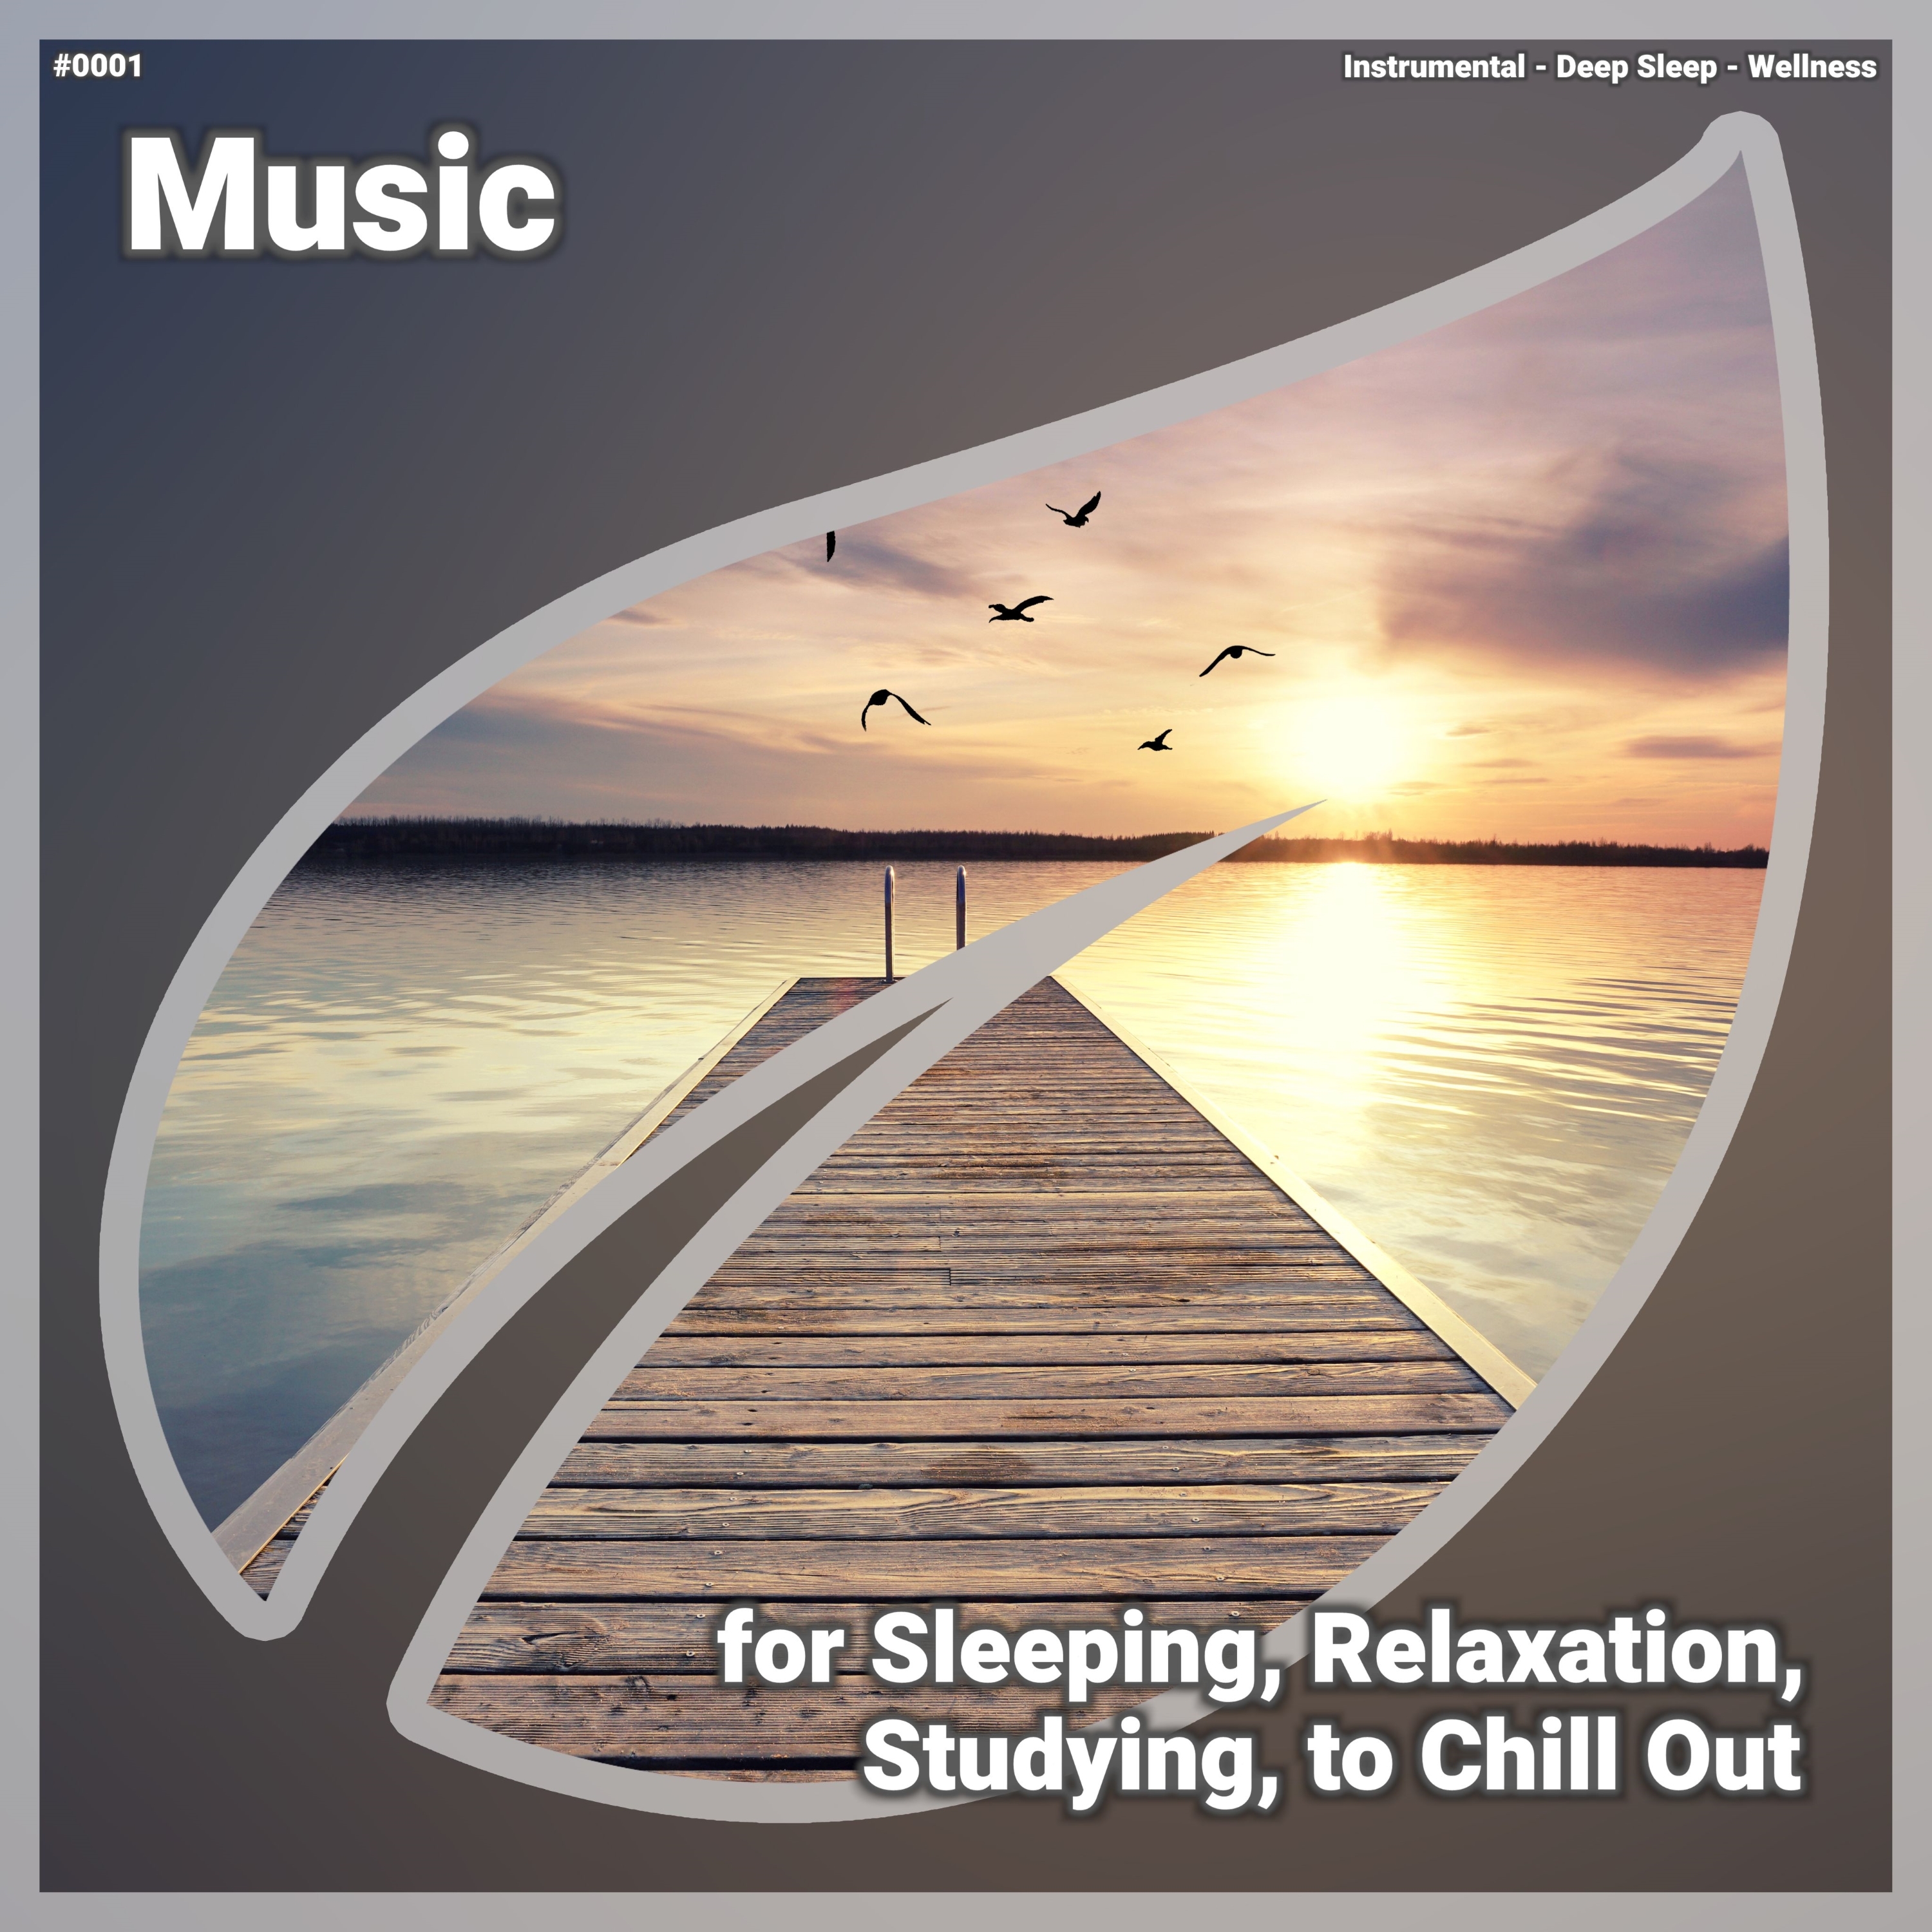 I-download Relaxing Music, Pt. 69